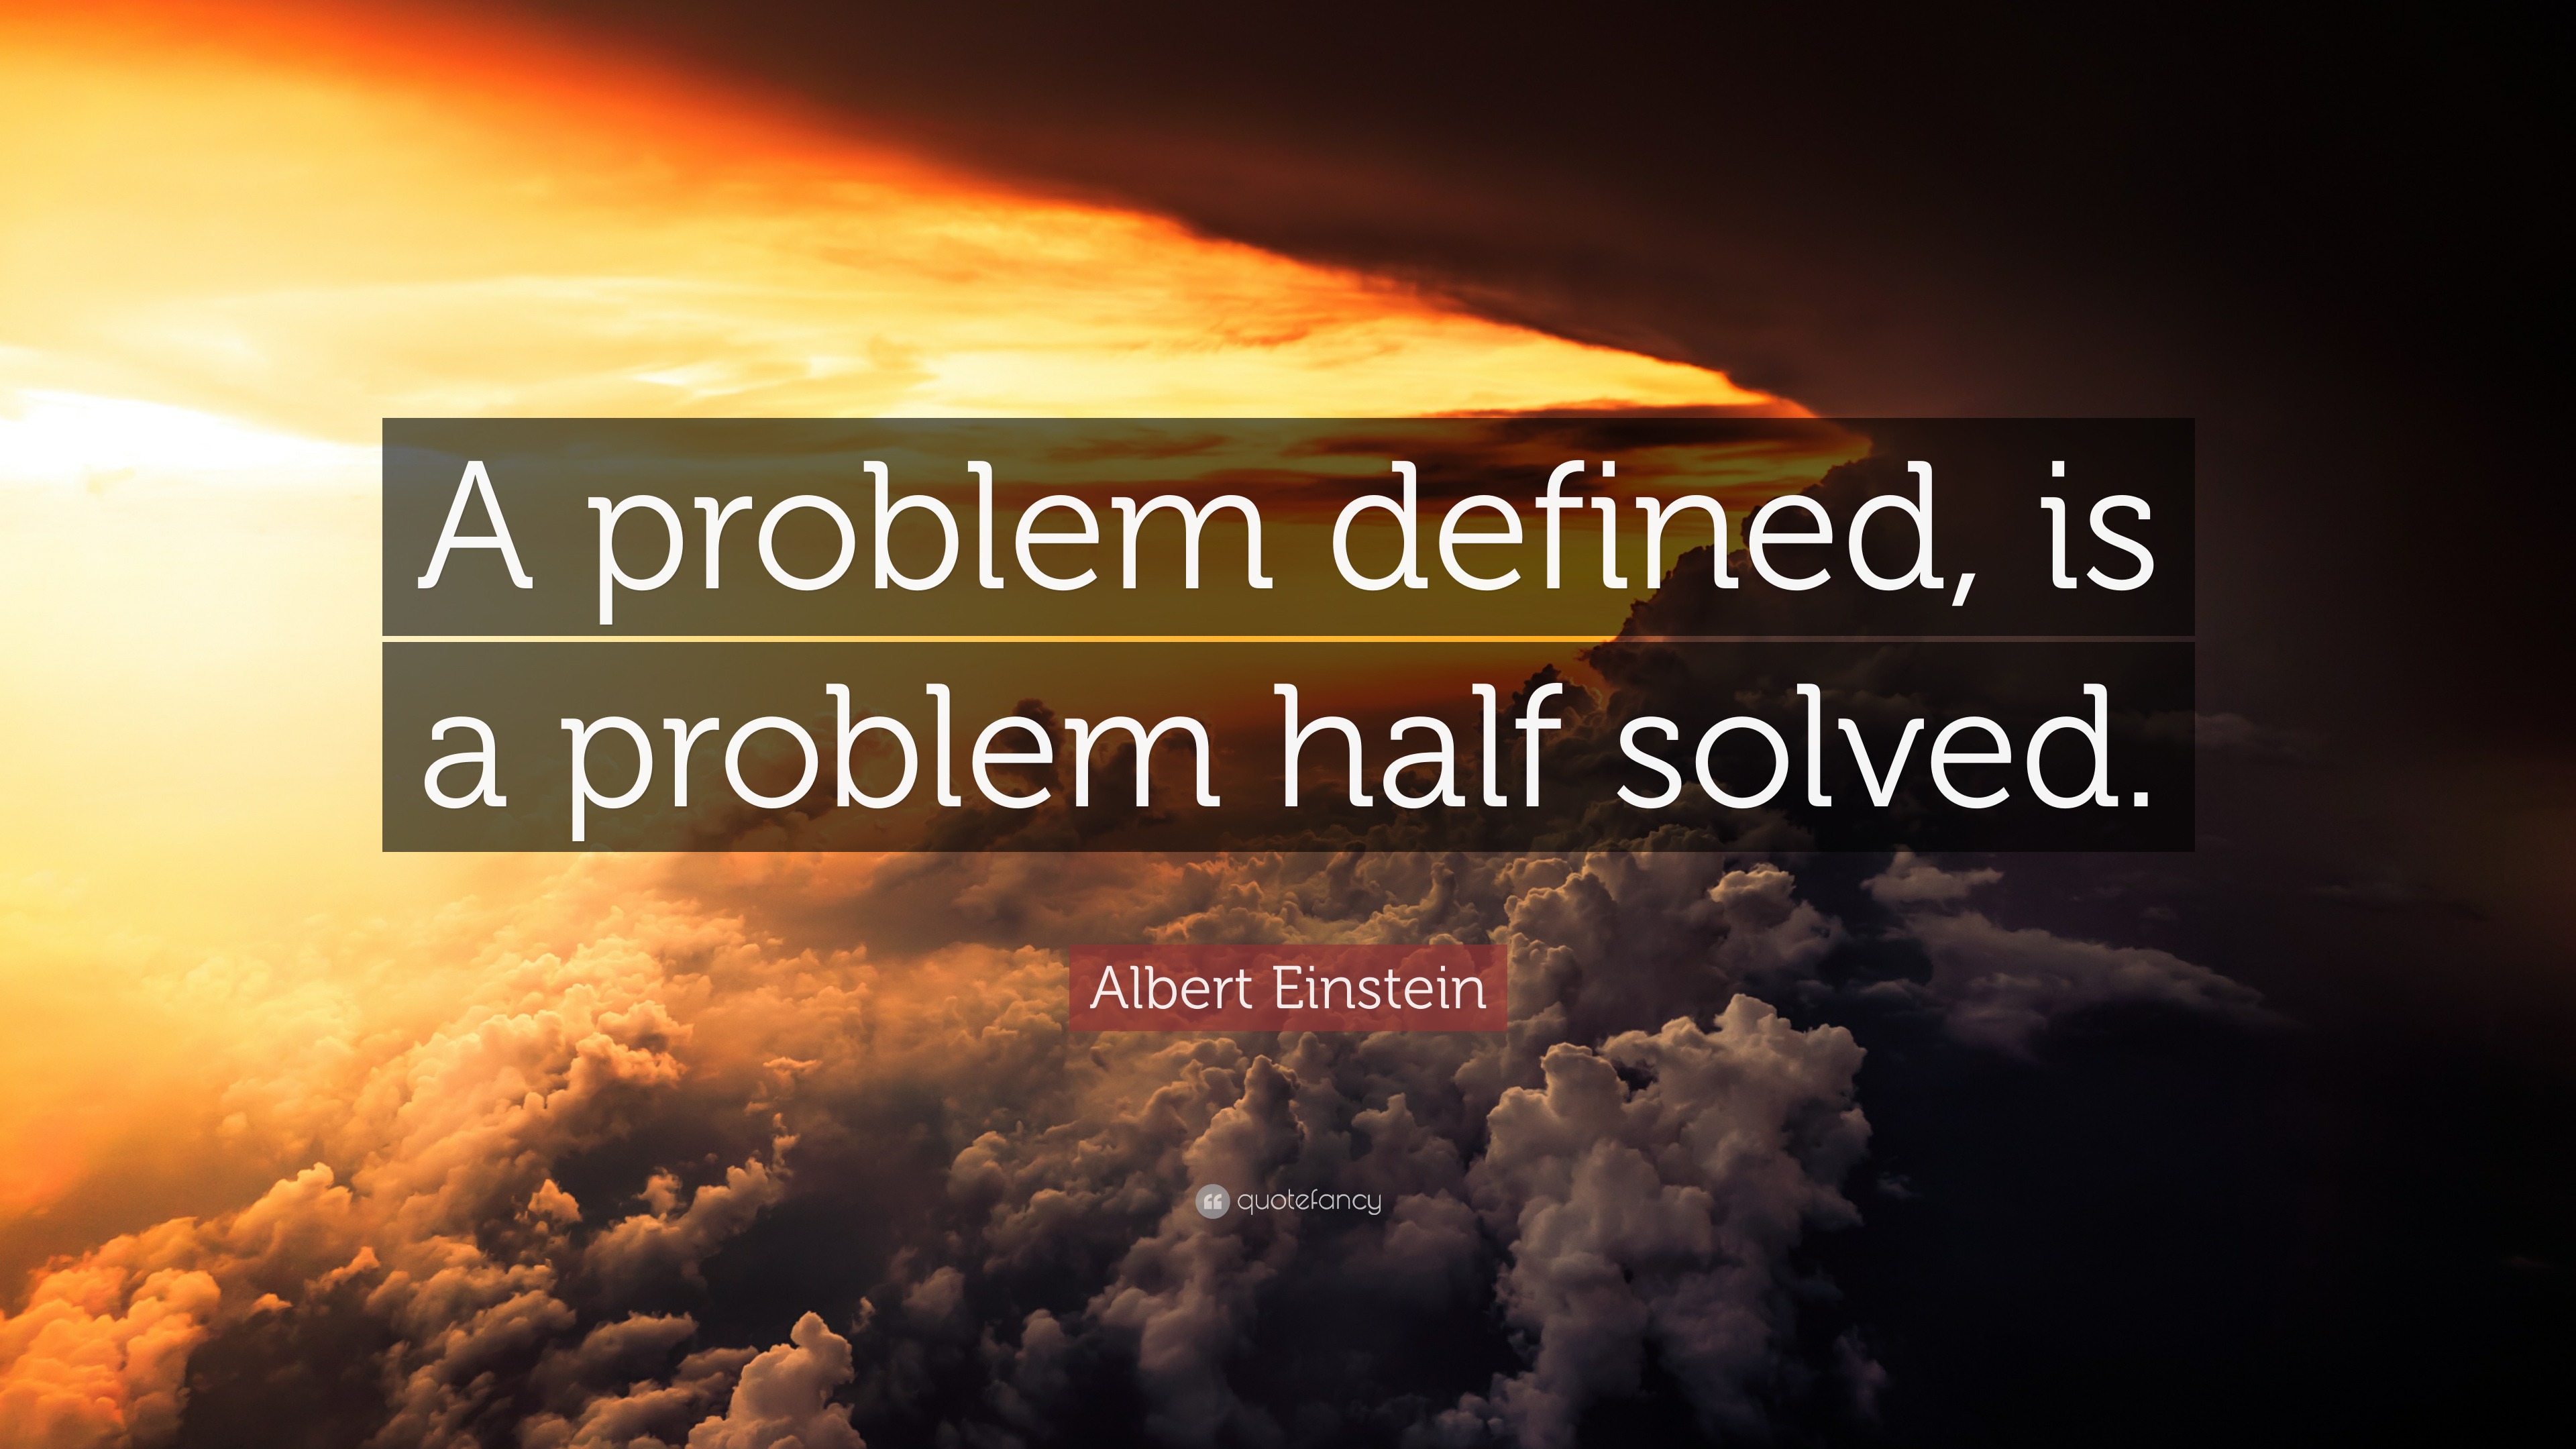 a problem well defined is half solved justify